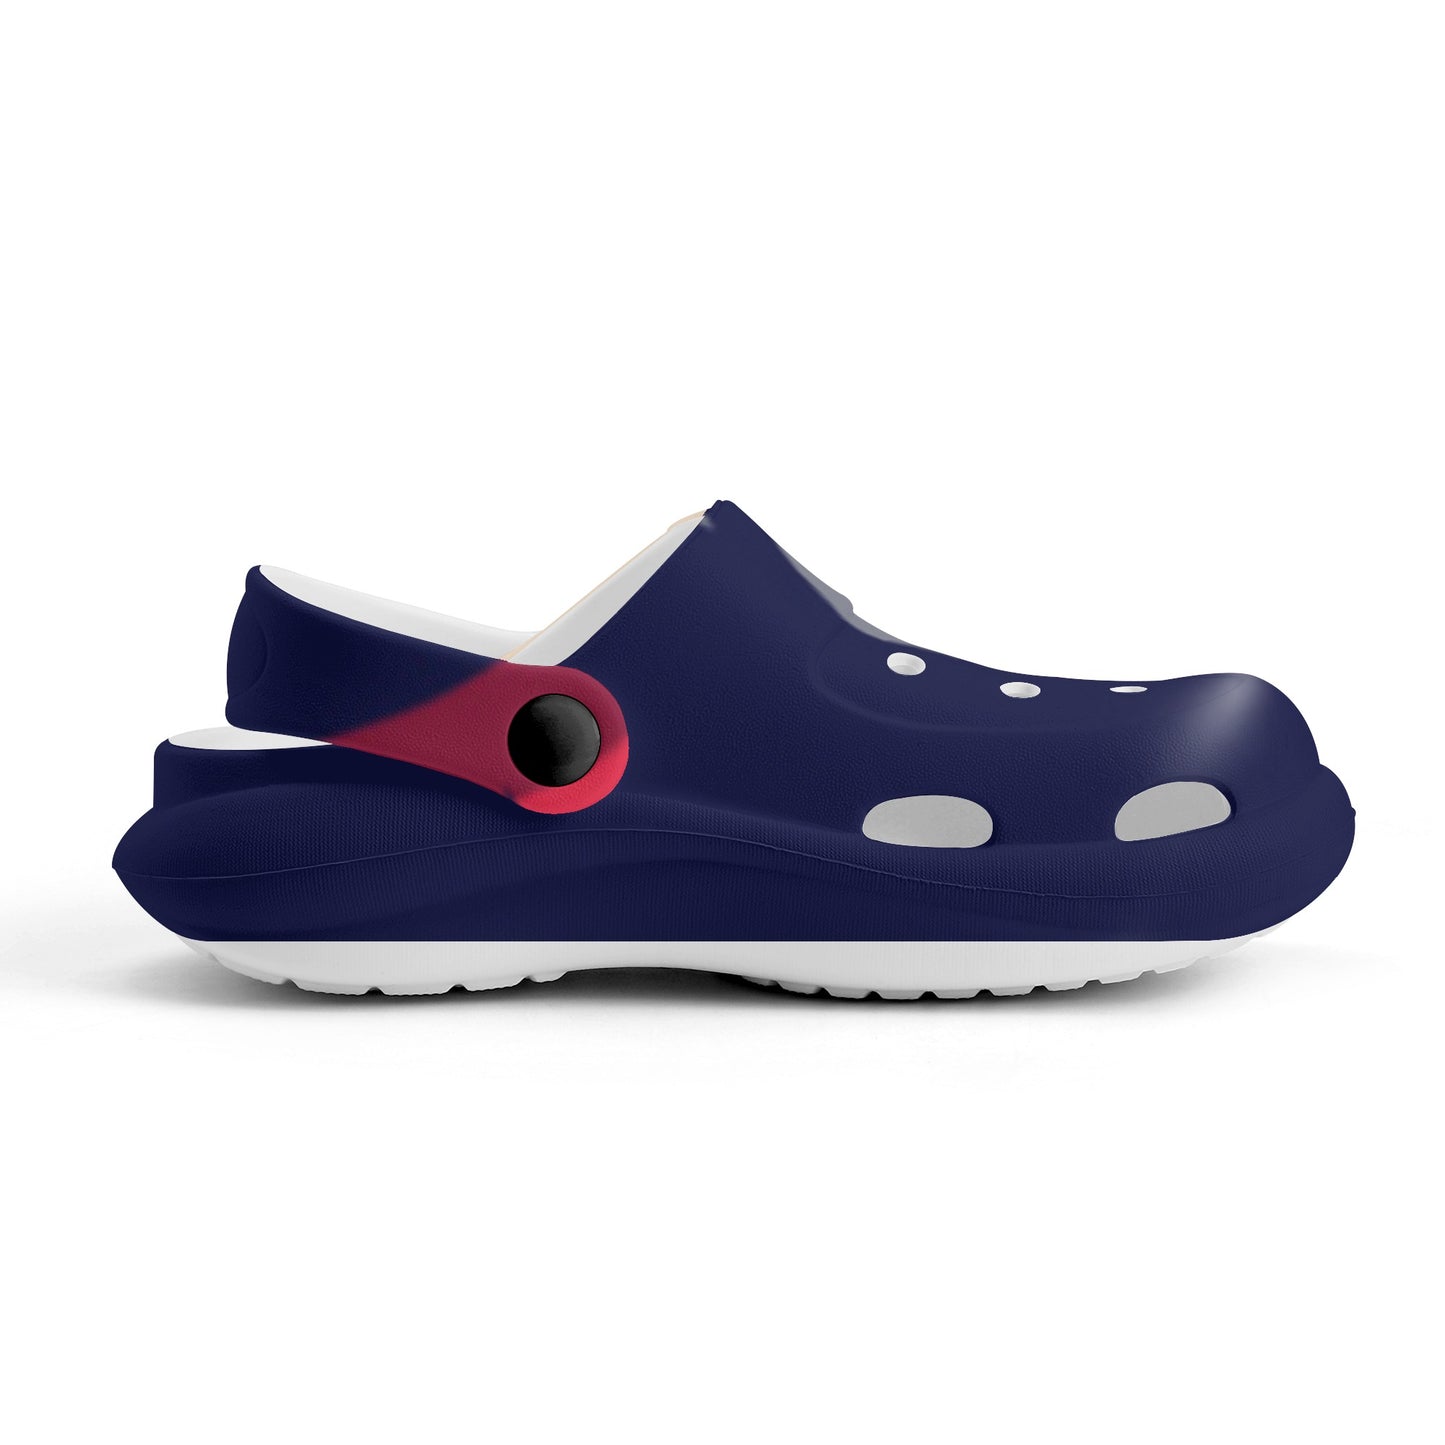 Pure nature project Gufetto Kid's Casual Sandal Clogs